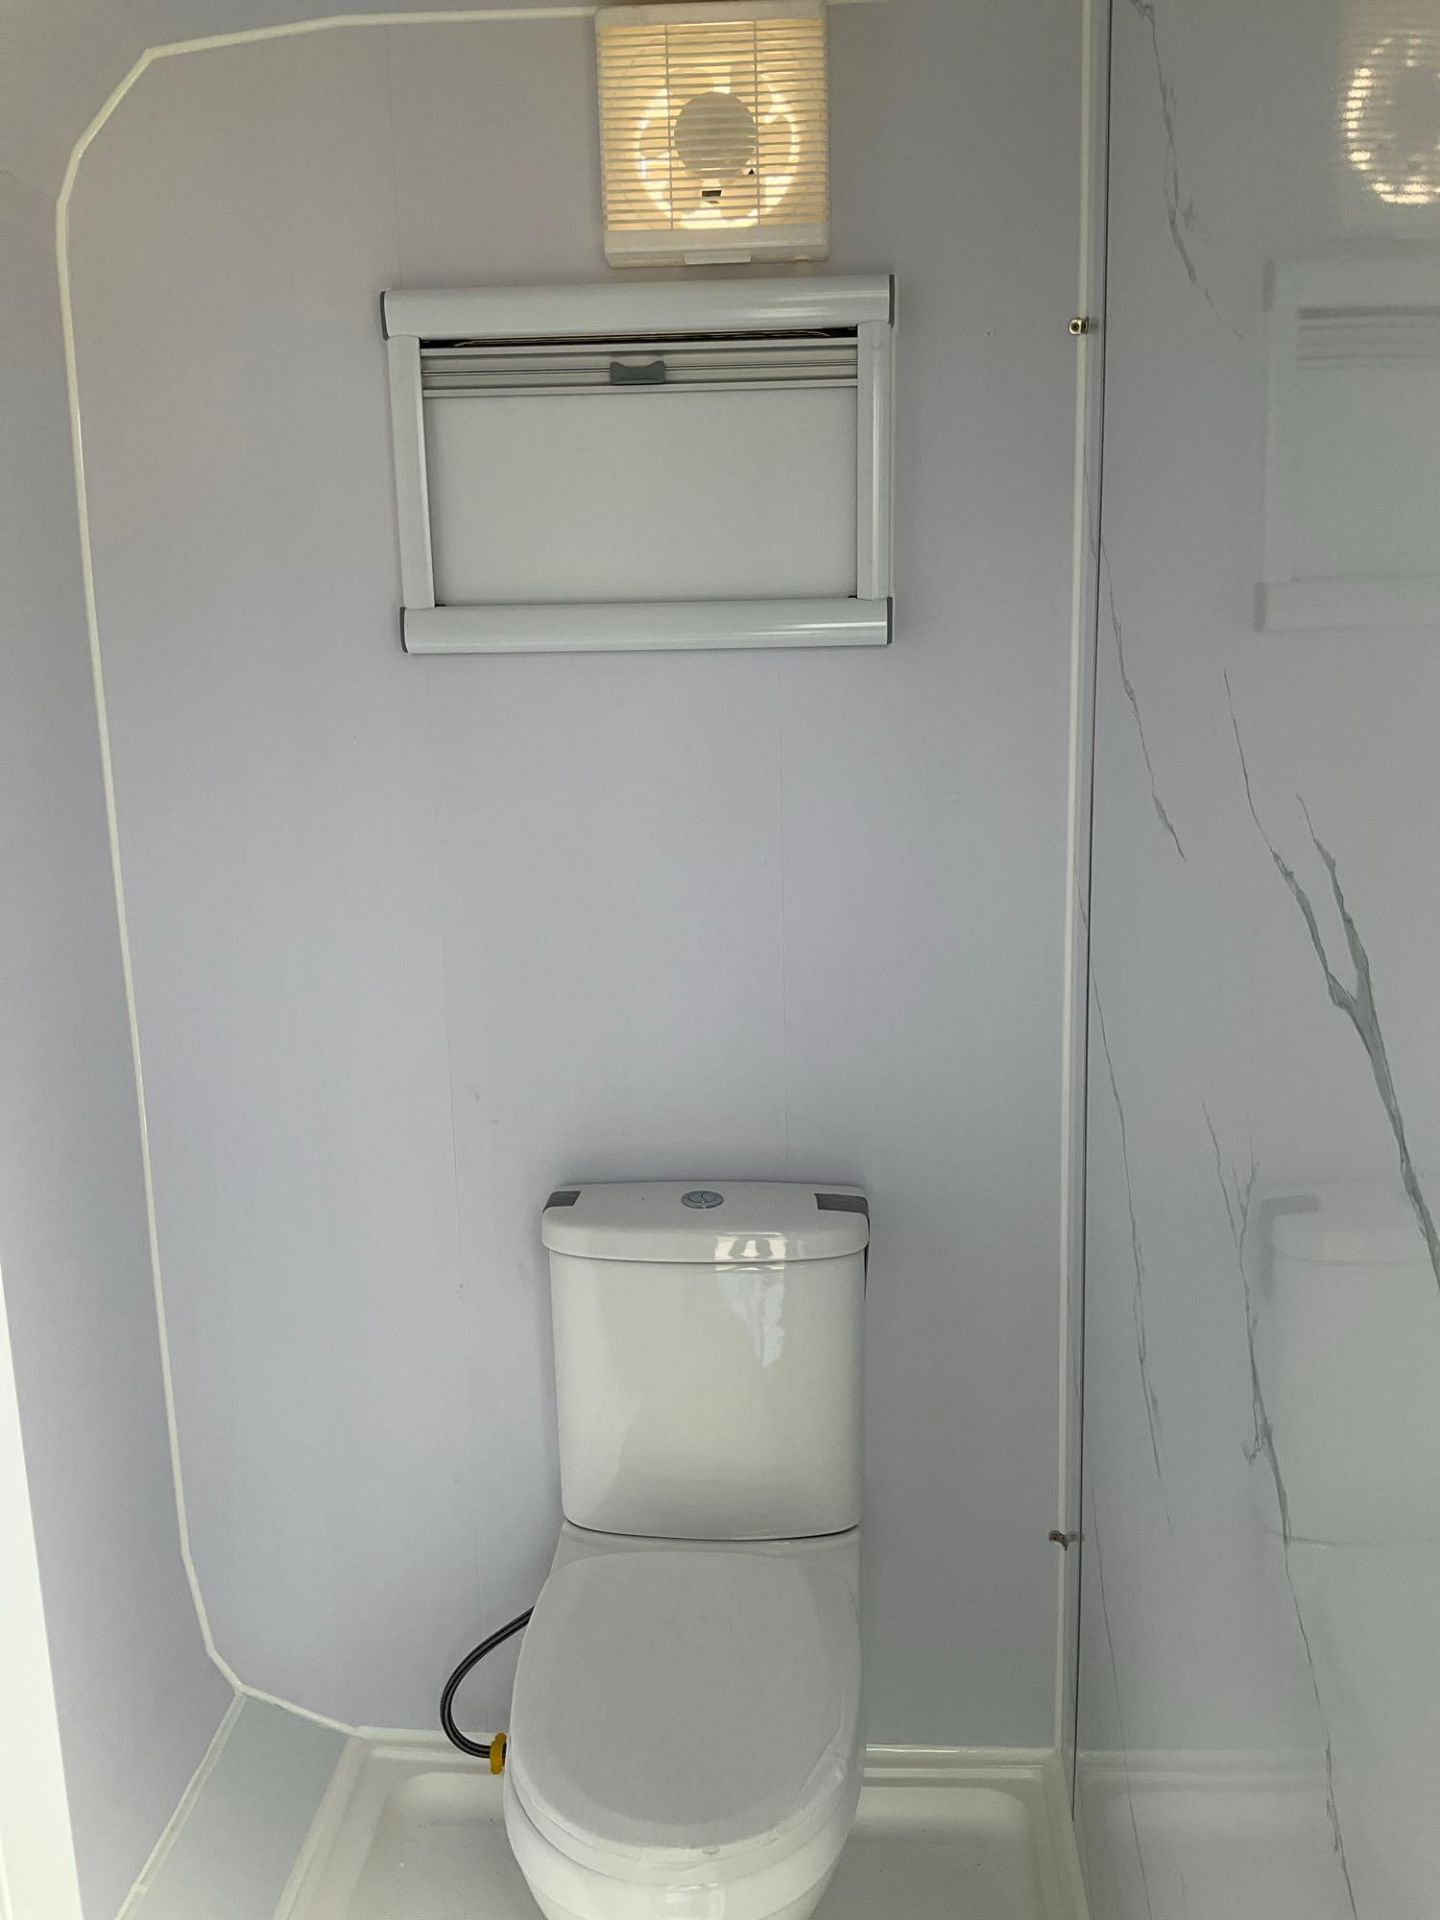 UNUSED 13FT...HOUSE WITH SHOWER ROOM, TOILET, WINDOW, PLUMBING AND ELECTRIC HOOK UP, 110V, LIGHTI... - Image 17 of 19